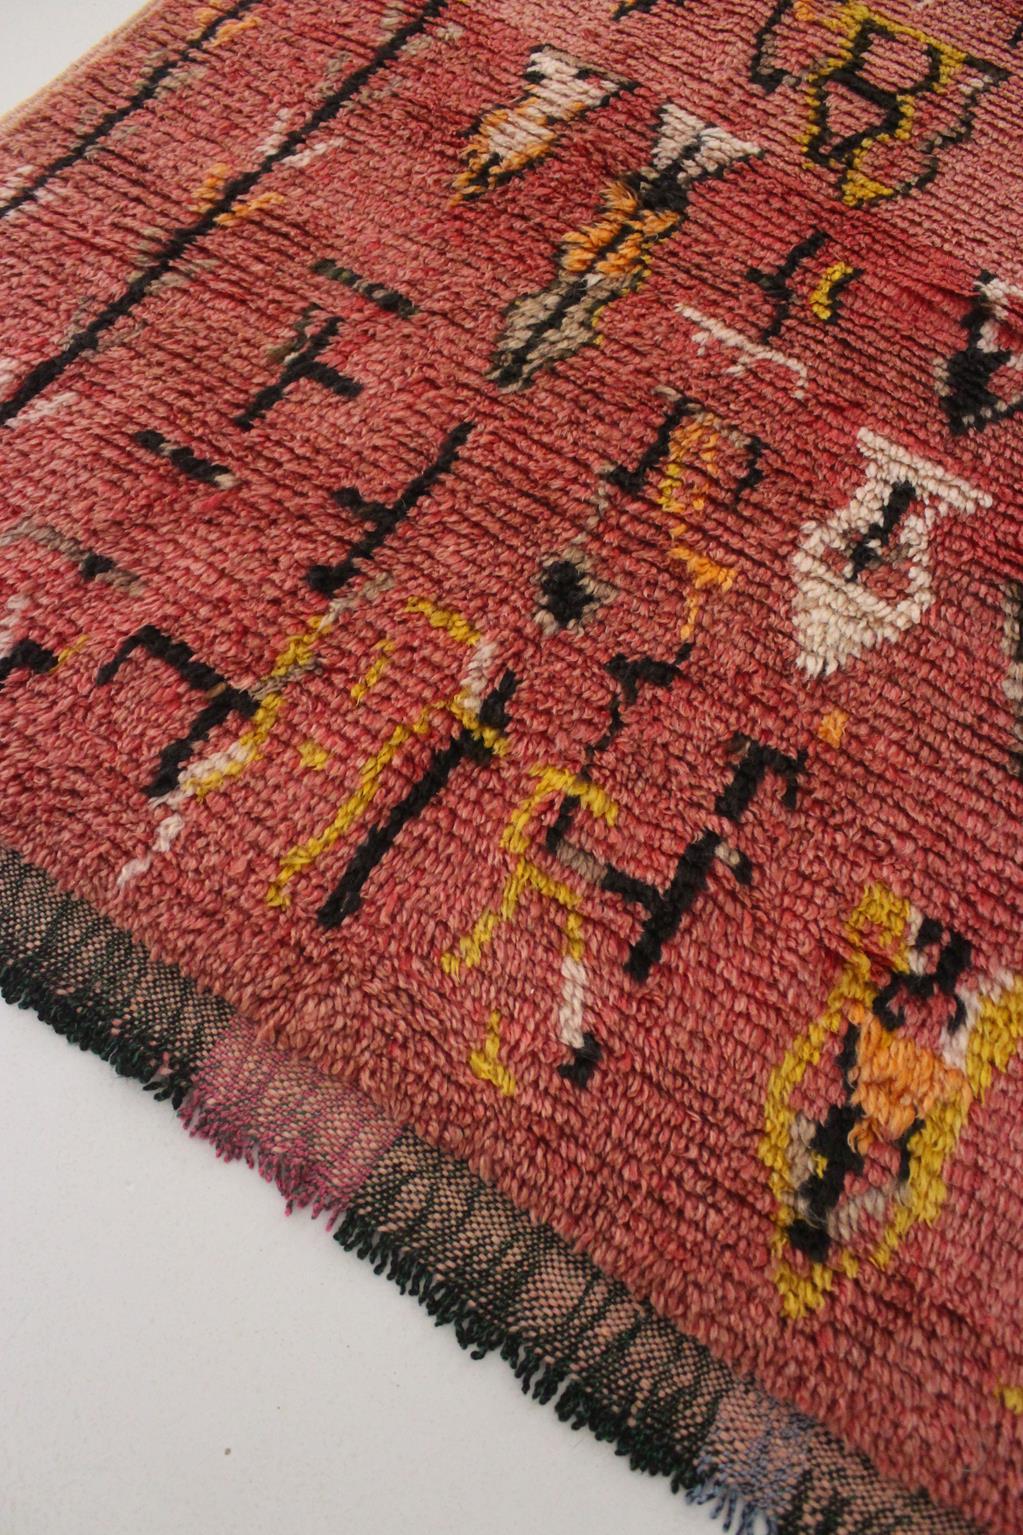 Wool Vintage Moroccan Azilal rug - Pink and yellow - 3.7x7.7feet / 114x236cm For Sale